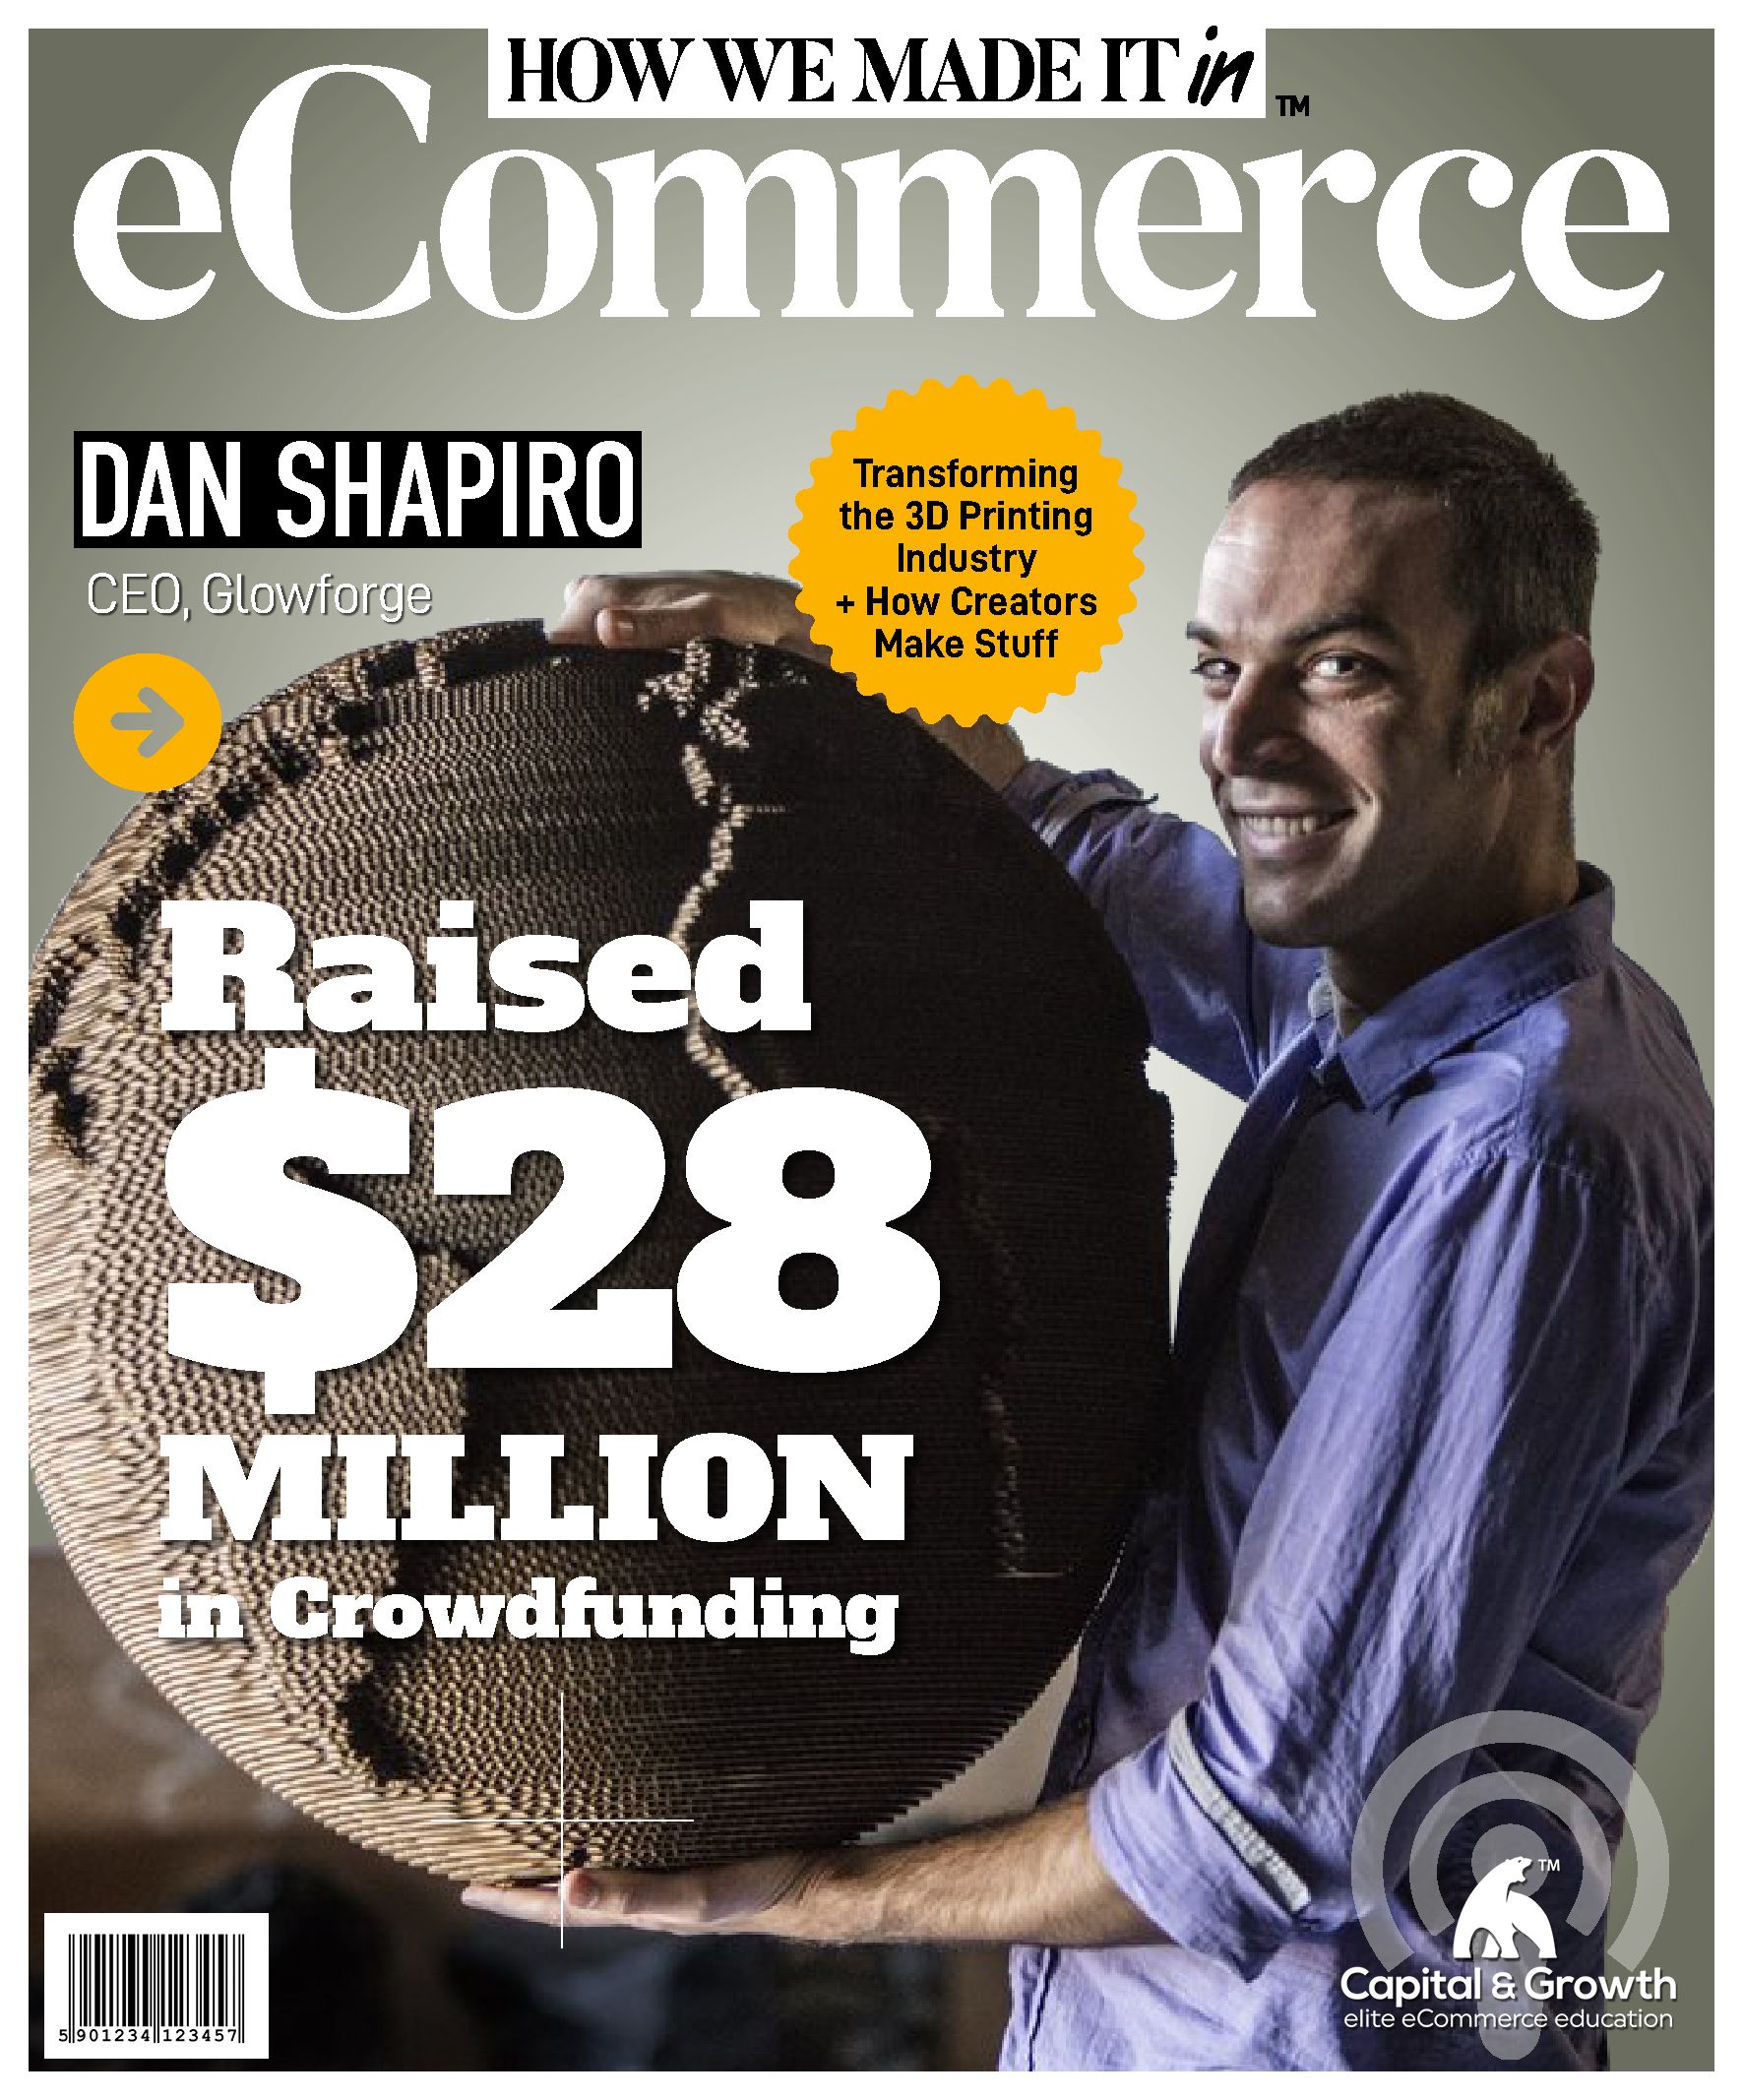 Crowdfunding Record ($28 Million): The Specific Tactics Dan Shapiro Used and How He Is Transforming 3D Printing